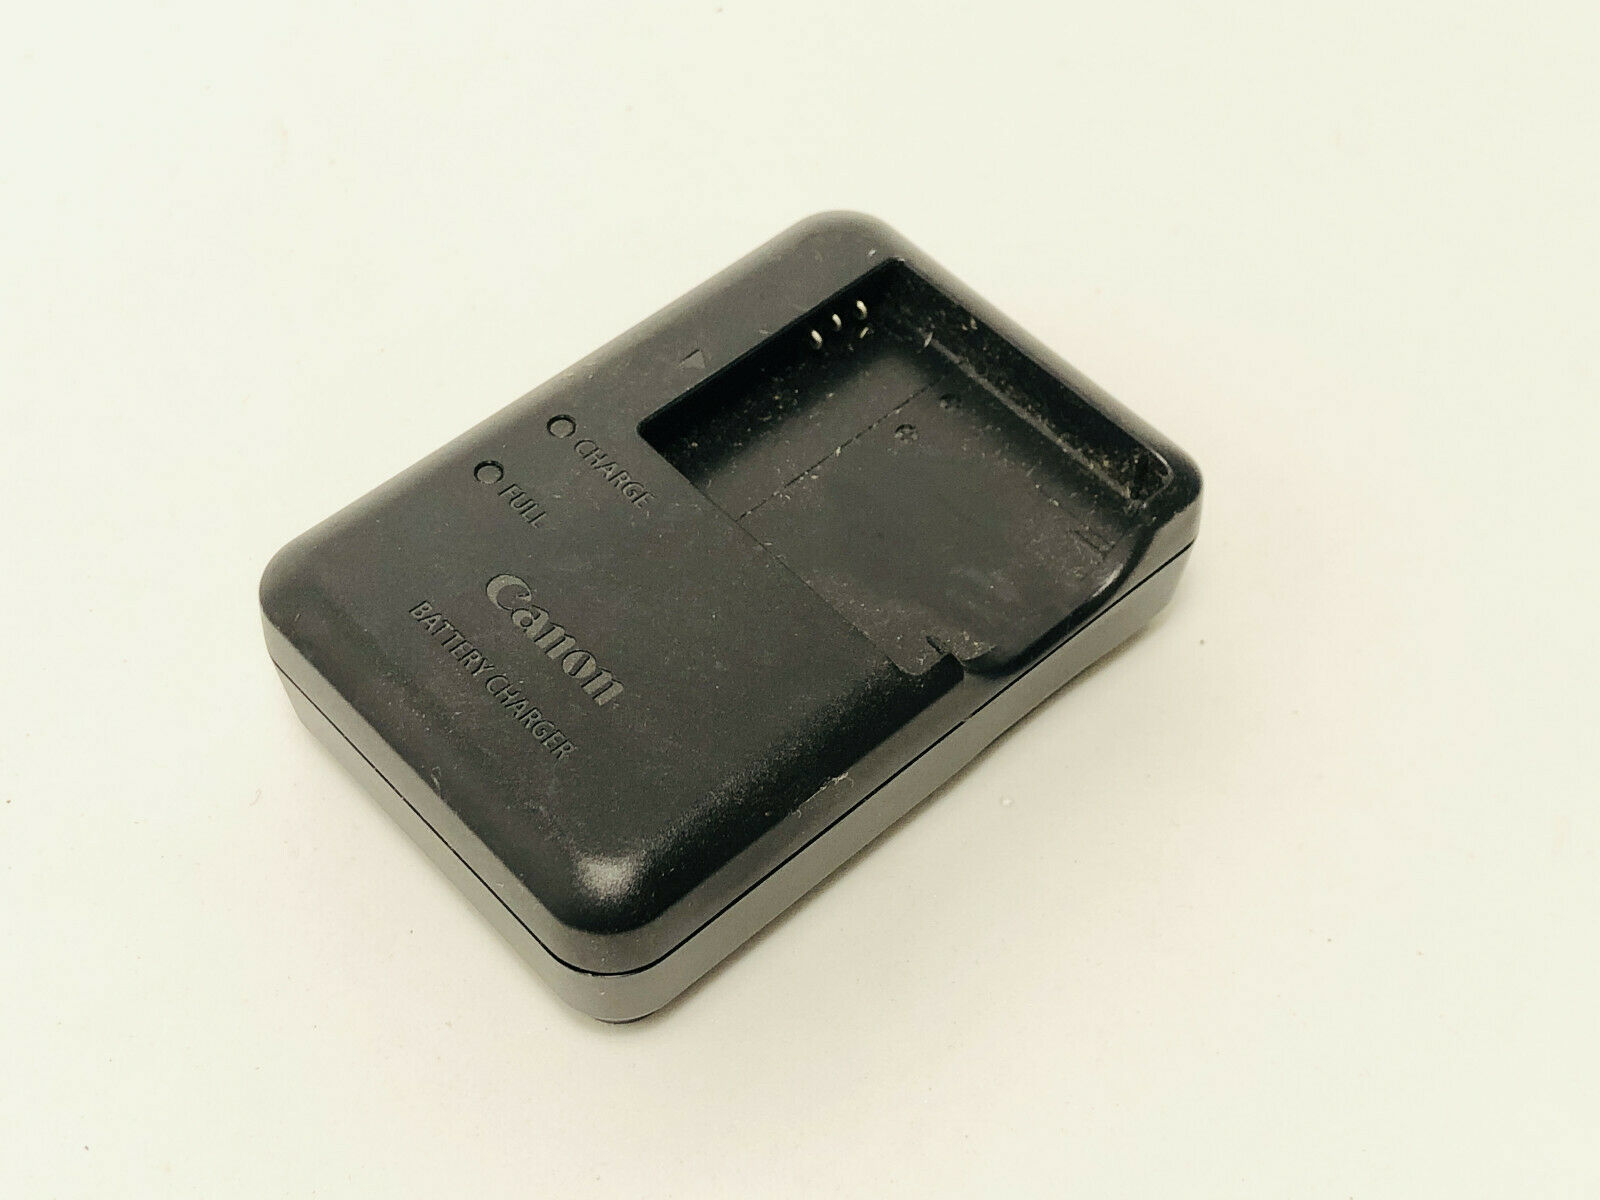 Primary image for Genuine Canon CB-2LA Charger for Canon PowerShot A2200. A3100 IS Digital Camera